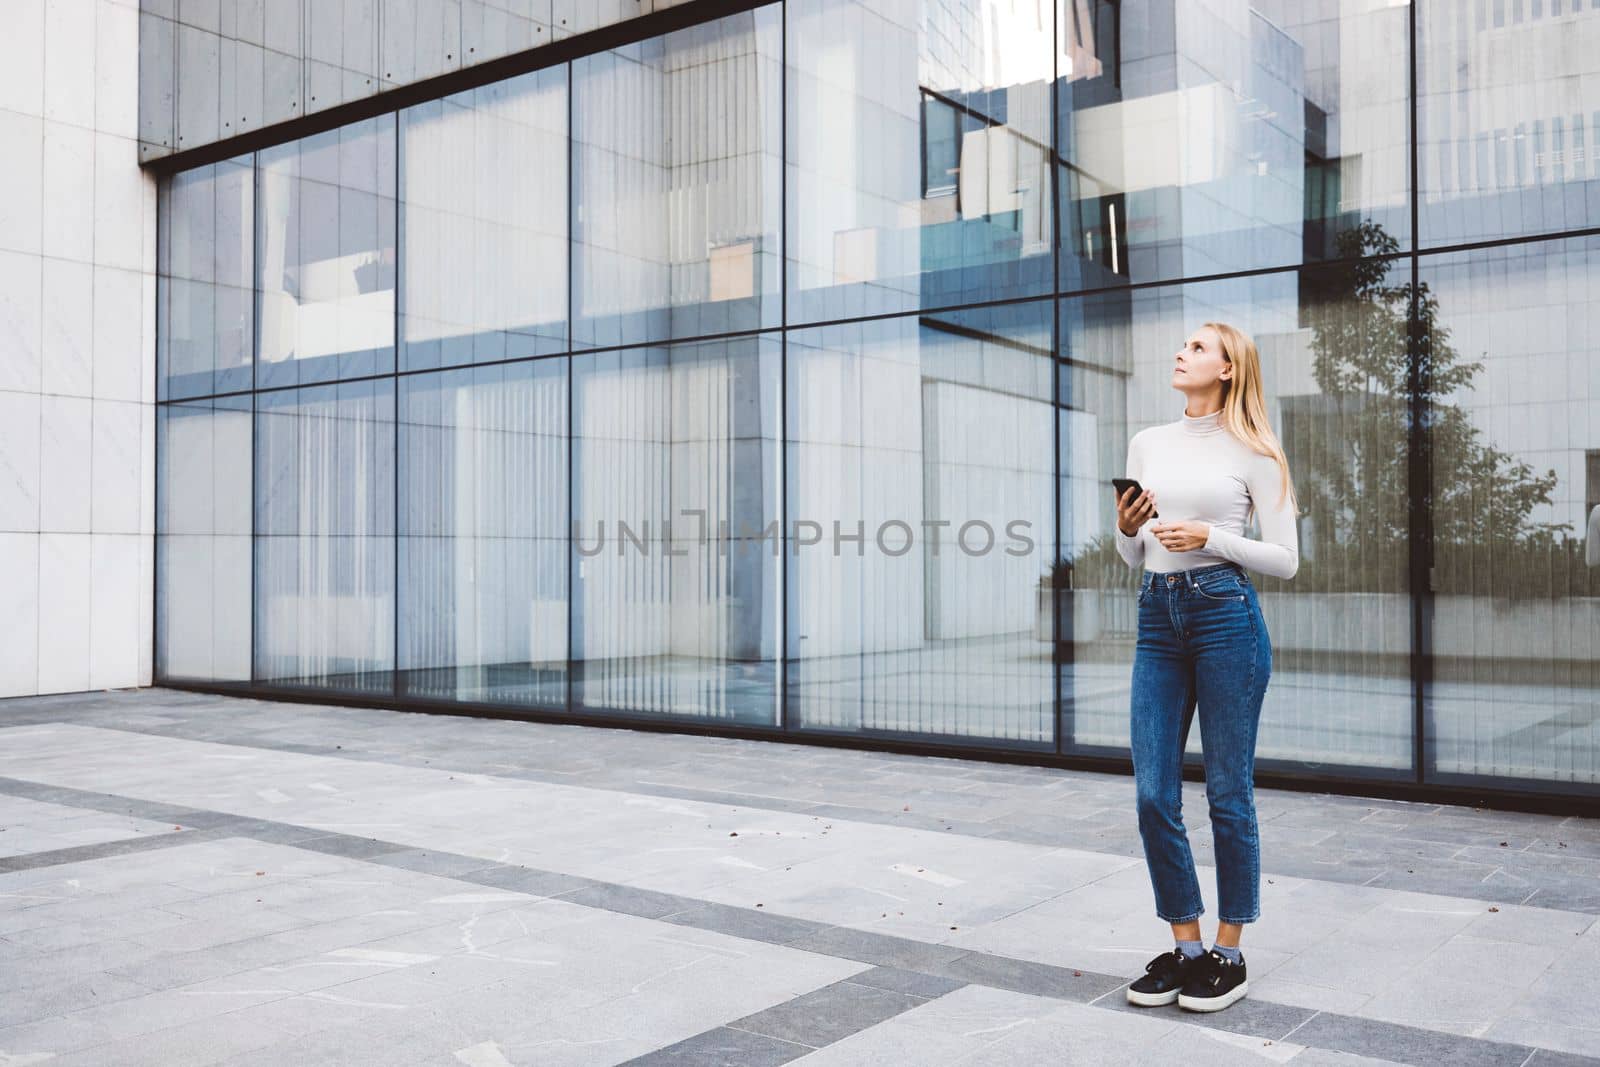 Young caucasian woman in an urban modern setting, office buildings in the background, using a mobile device. Business woman on a break.